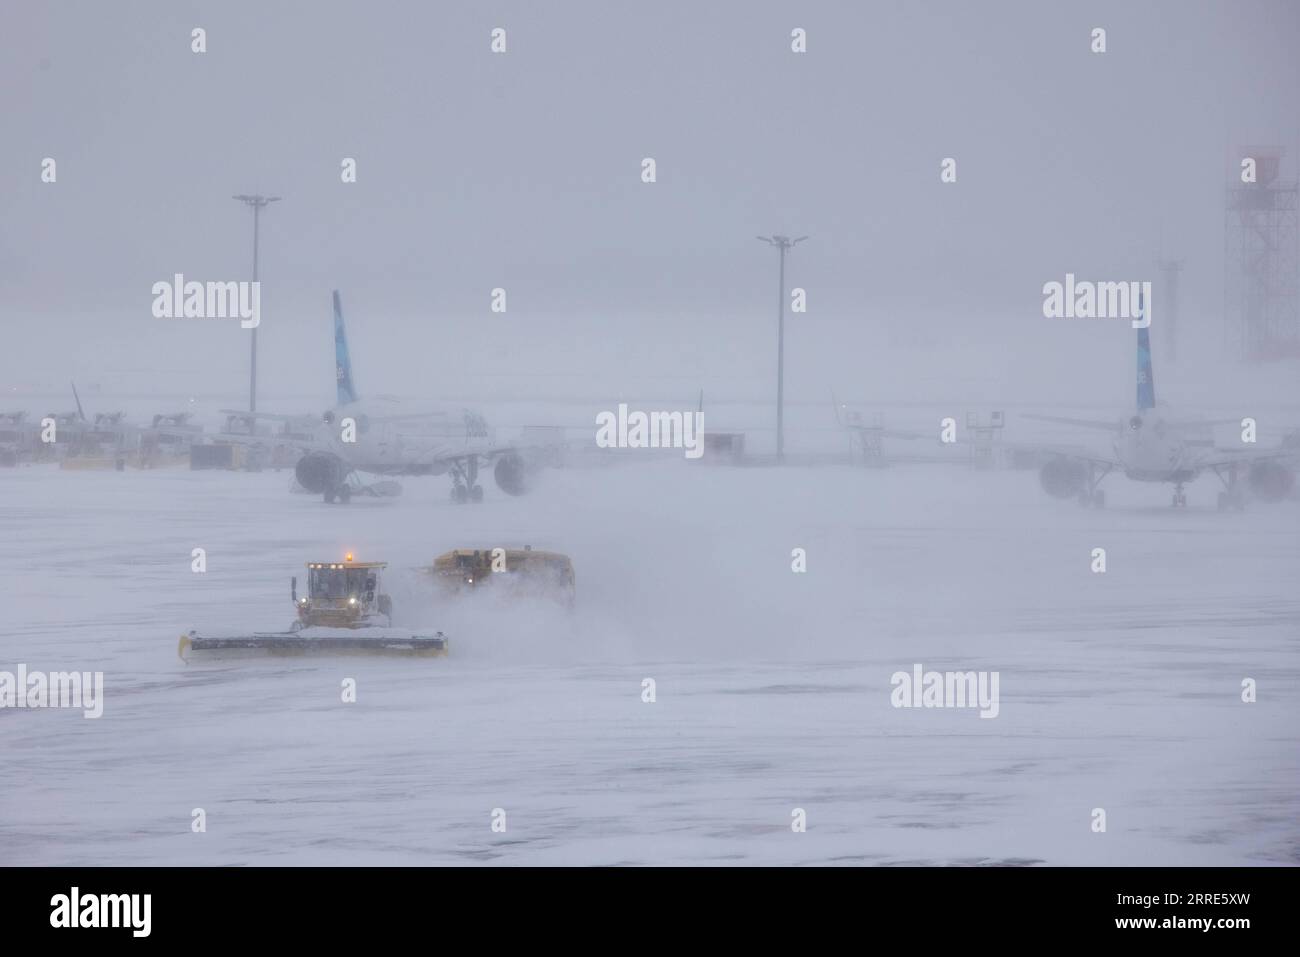 220130 -- NEW YORK, Jan. 30, 2022 -- Snow plows work at John F. Kennedy International Airport in New York, the United States, Jan. 29, 2022. Winter storm Kenan is bringing heavy snow and wind gusts to New York City and surrounding areas on Saturday. Snowfall at John F. Kennedy International Airport exceeded 5 inches in the last 12 hours, said a tweet from the National Weather Service at 9 a.m. on Saturday. As much as 460 flights from John F. Kennedy International Airport were canceled accounting for 80 percent of the total, according to travel information platform flightaware.com. Photo by /Xi Stock Photo